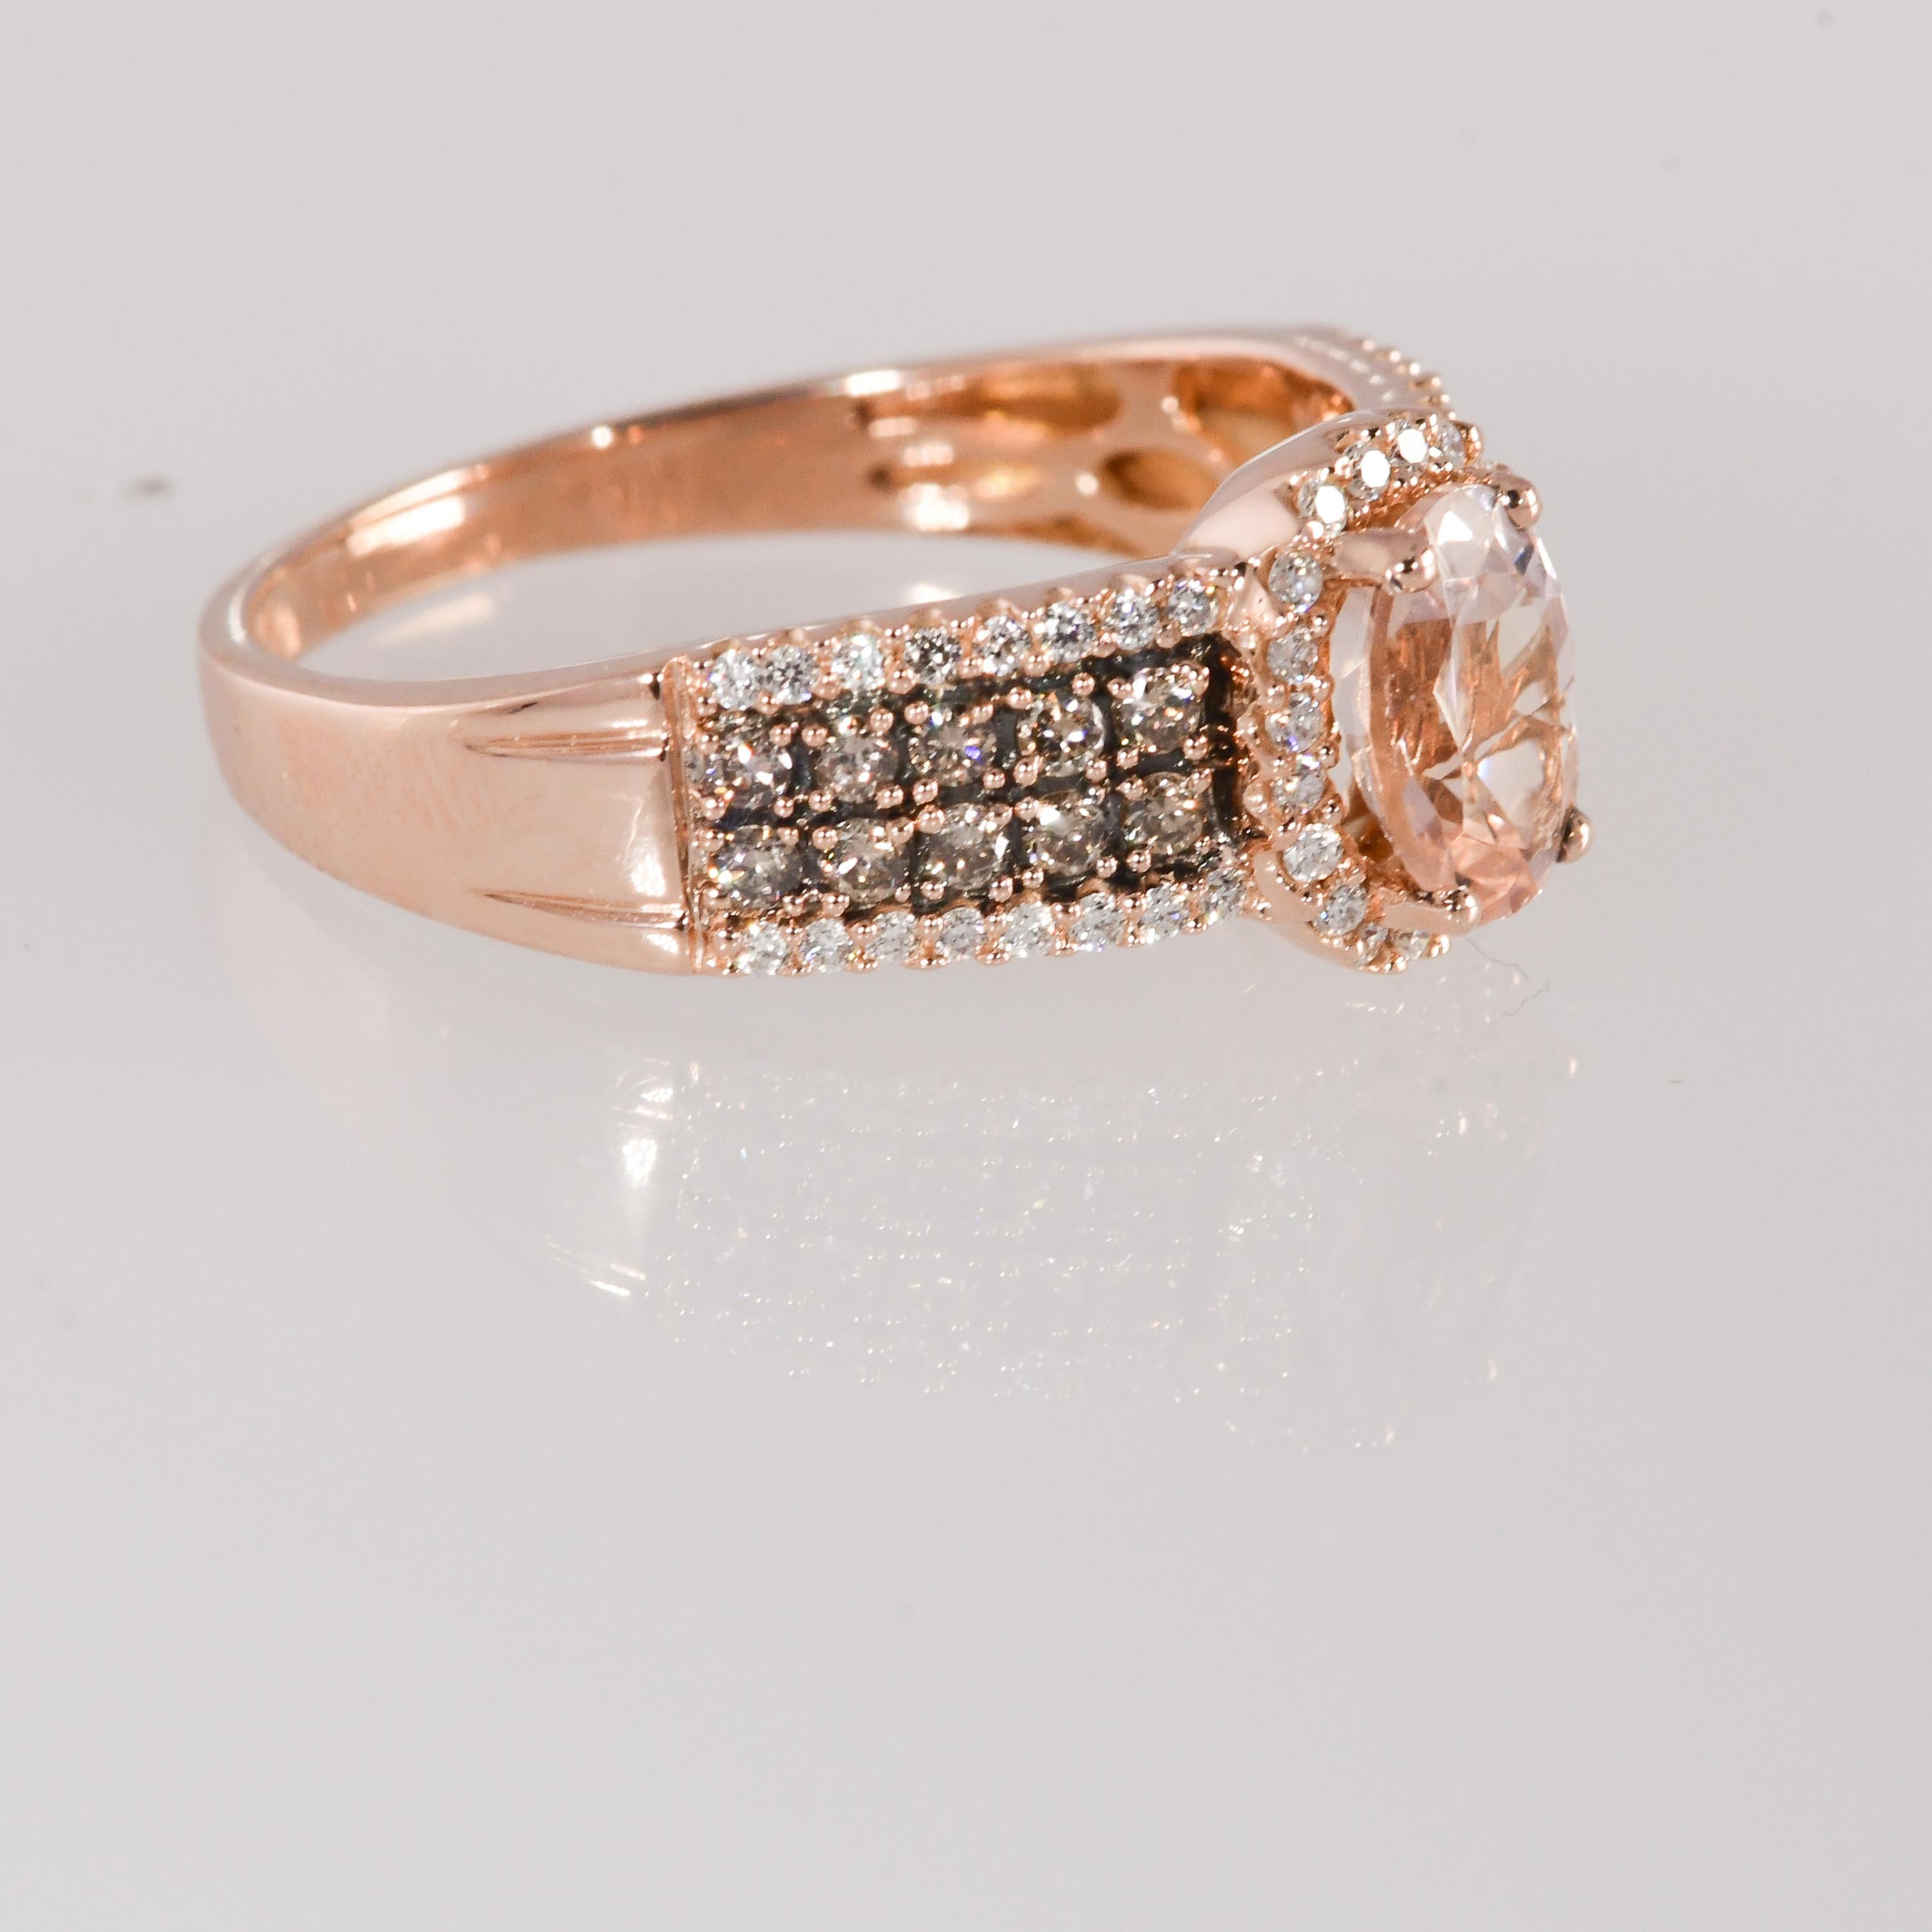 LeVian Morganite & .50 CTW Chocolate and White Diamond Rose Gold Ring 14K 
Diamond:  CTW .50    Color: HI   Clarity: SI1 and Chocolate 
Metal: Strawberry Gold (rose gold)  
Purity: 14K 
Total Gram Weight: 4.30 grams
Finger size is 9 3/4 
Please